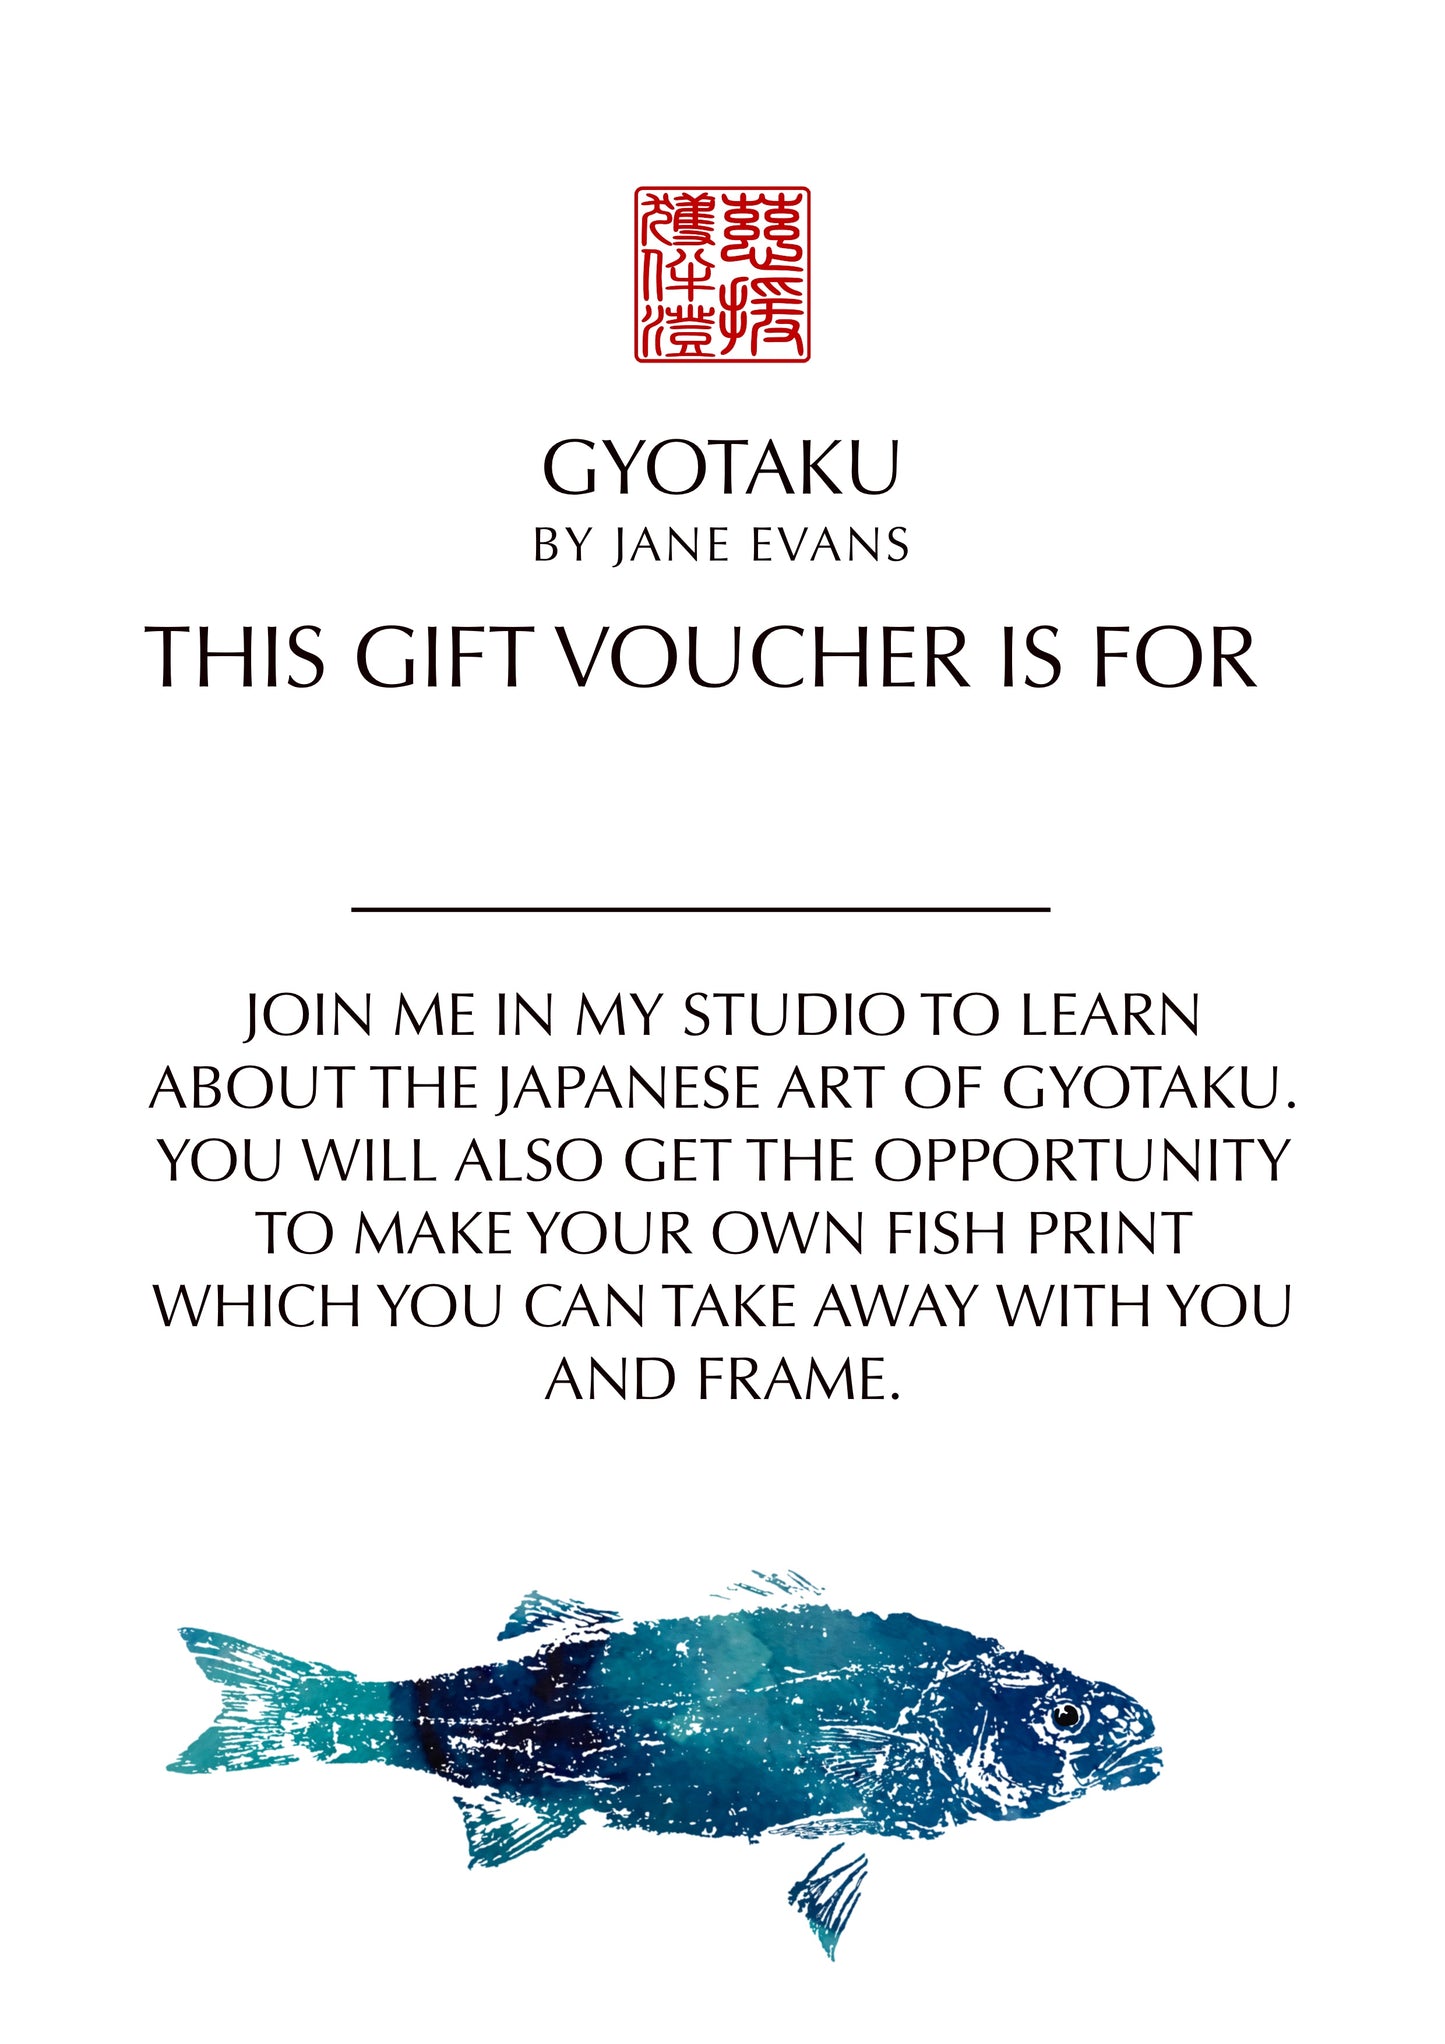 Gift Voucher for Printing Experience